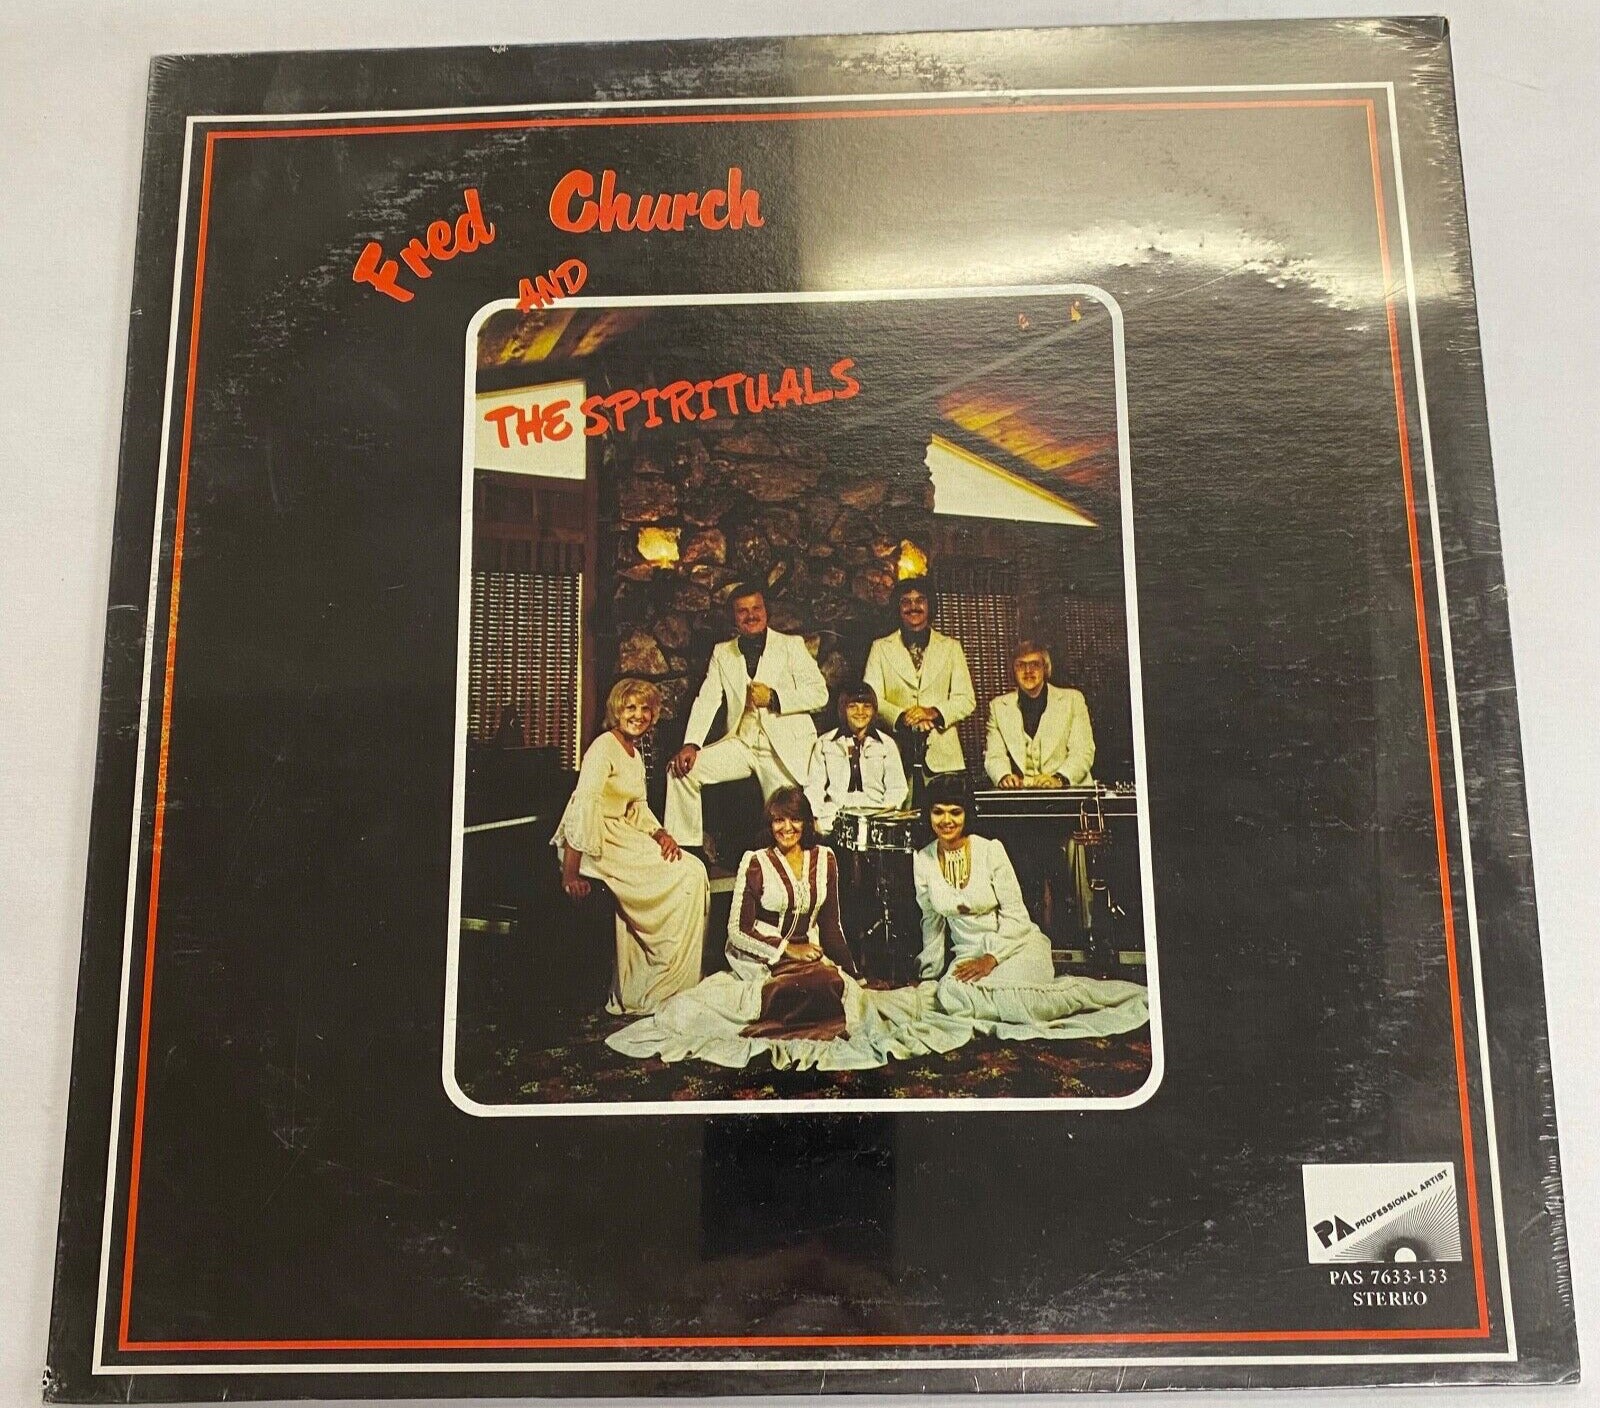 FRED CHURCH AND THE SPIRITUALS LP *NEW/SEALED